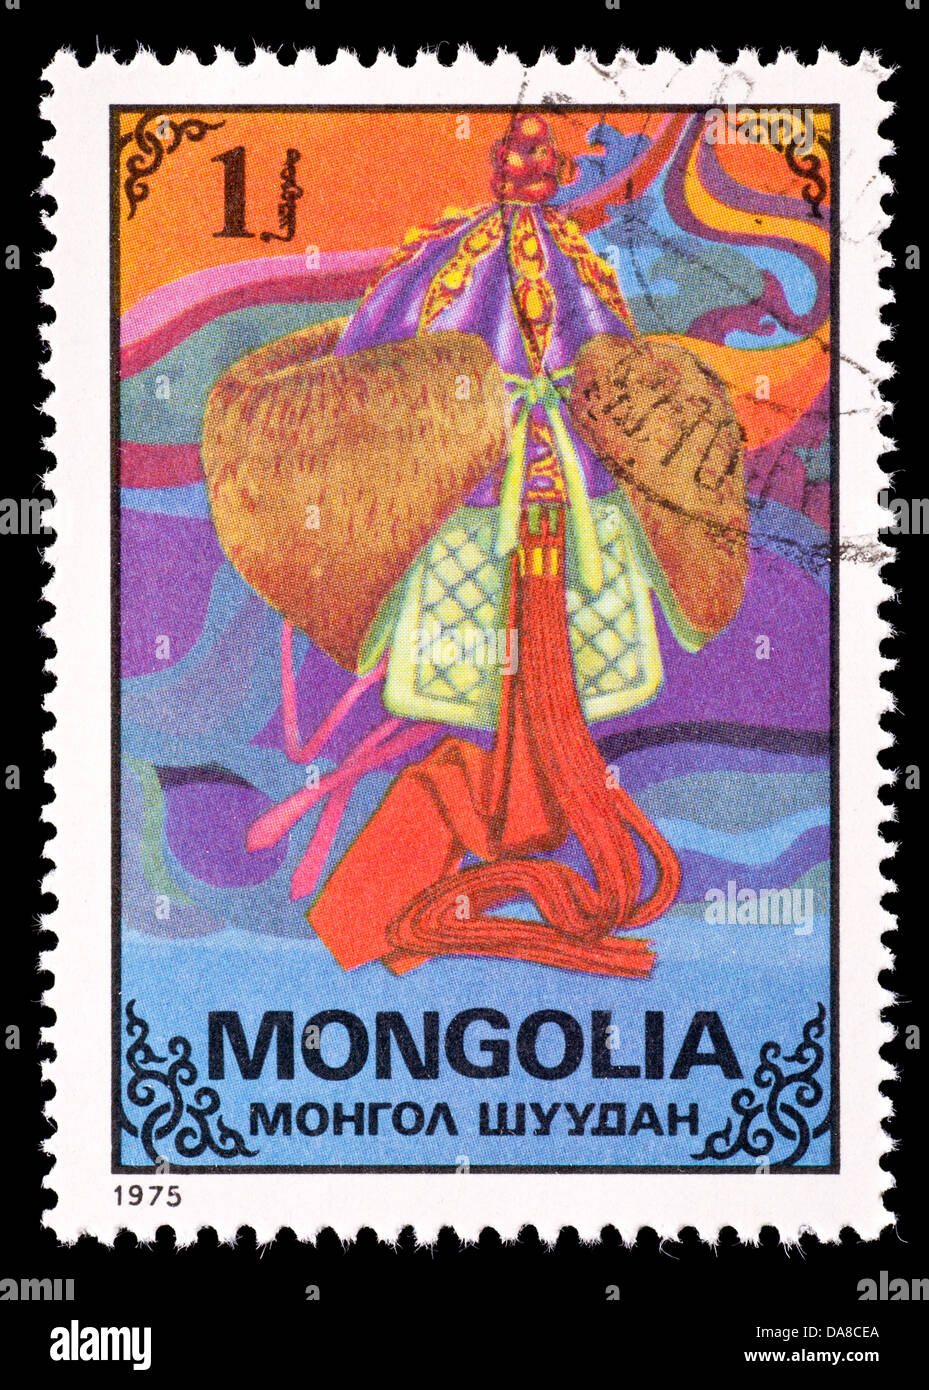 Postage stamp from Mongolia depicting a sable fur hat. Stock Photo